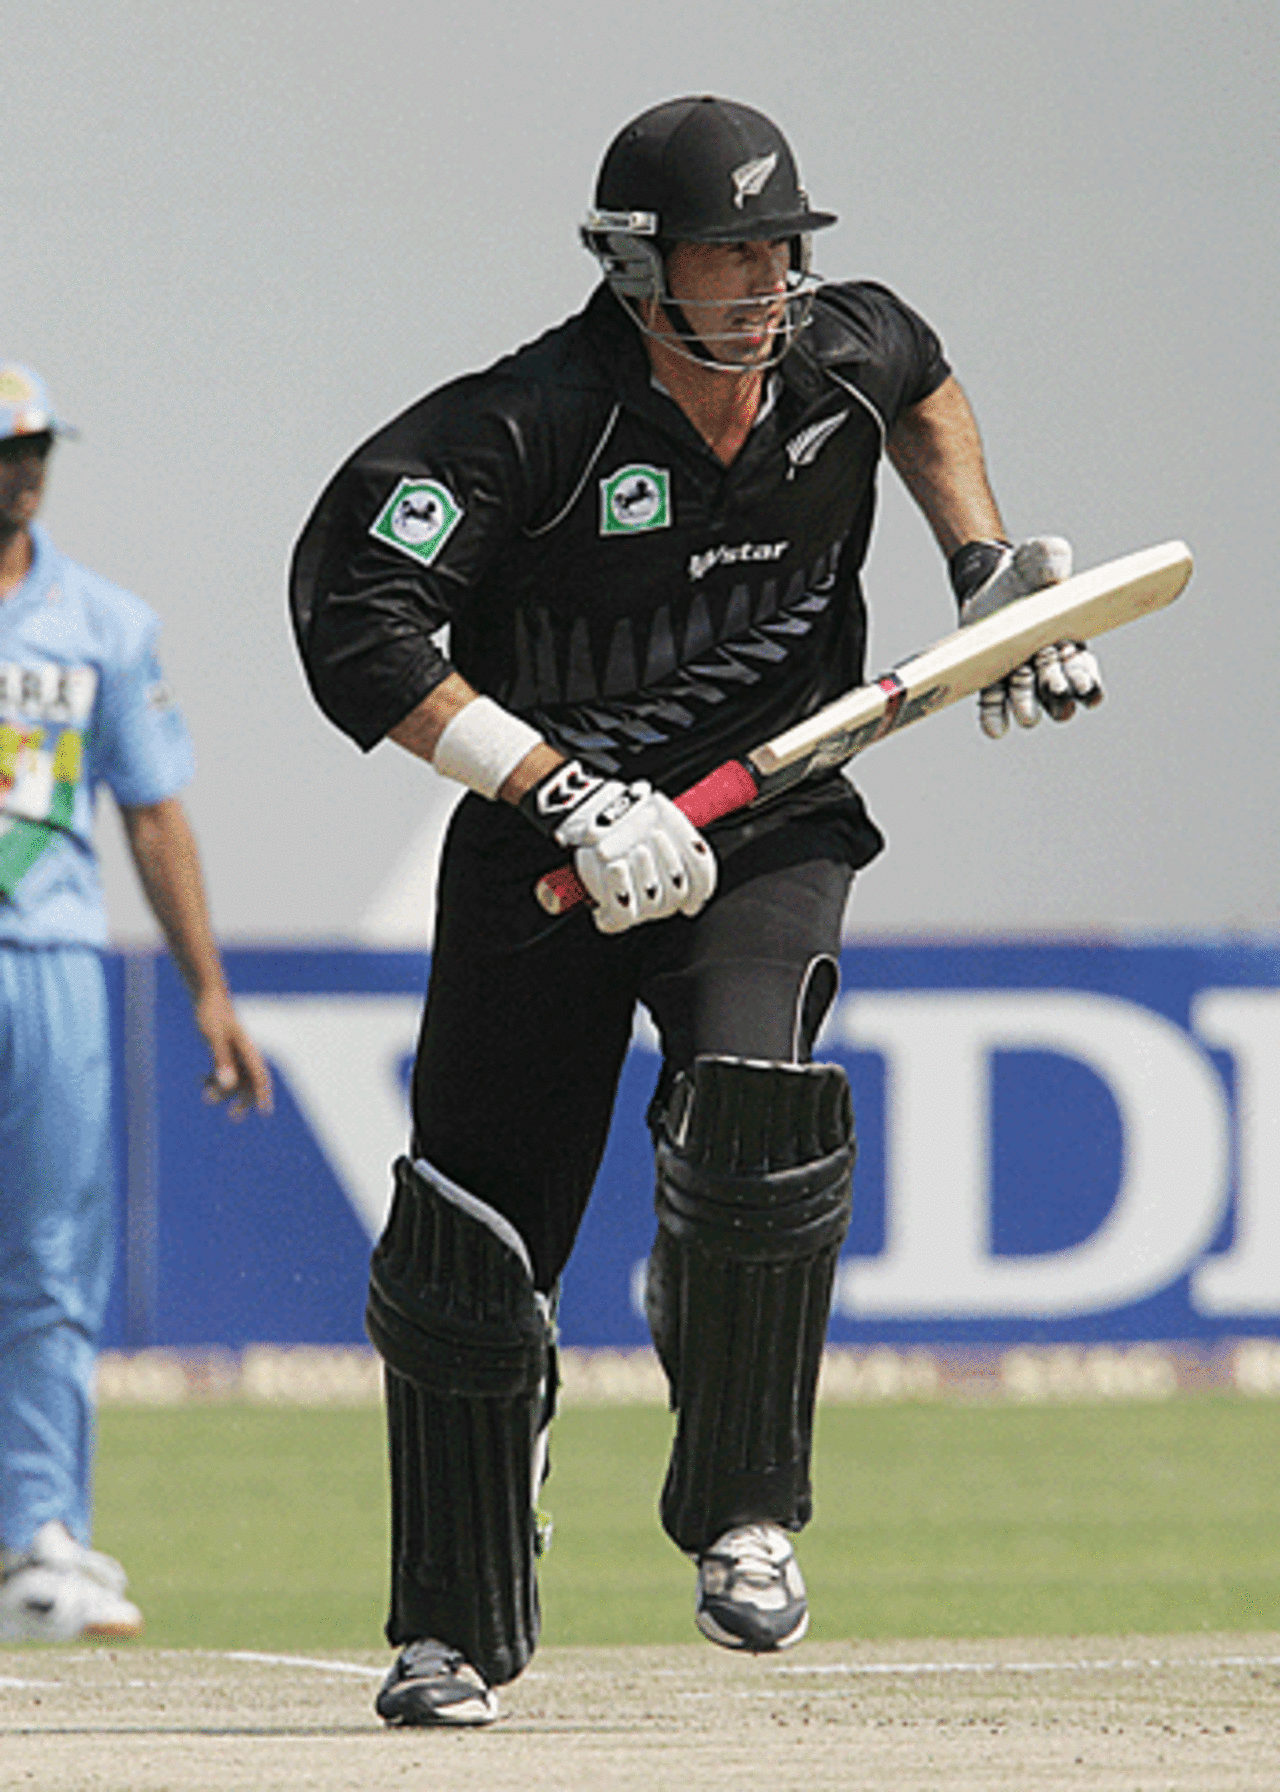 Stephen Fleming sets off for a run during a blazing opening partnership, India v New Zealand, Harare, September 6, 2005